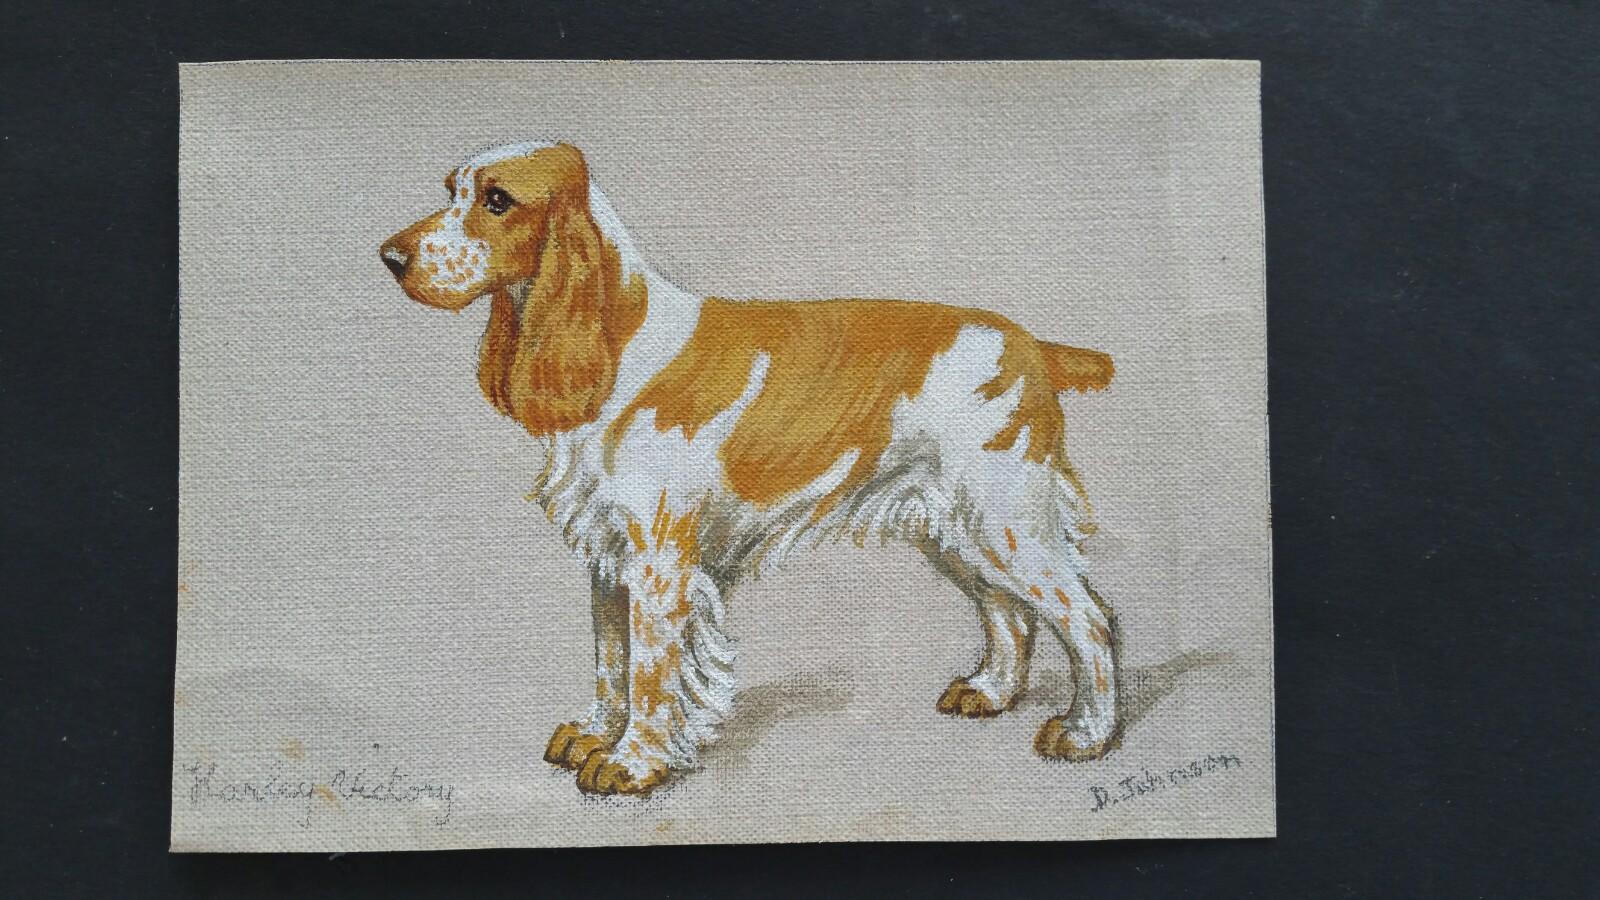 Cocker Spaniel: Harley Victory
by Dorothy Alexandra Johnson (1902-1988)
signed lower right
oil painting on canvas, unstretched

5.0 x 7.0 inches

A delightful painting by the highly regarded English dog artist Dorothy Alexandra Johnson. Featuring a